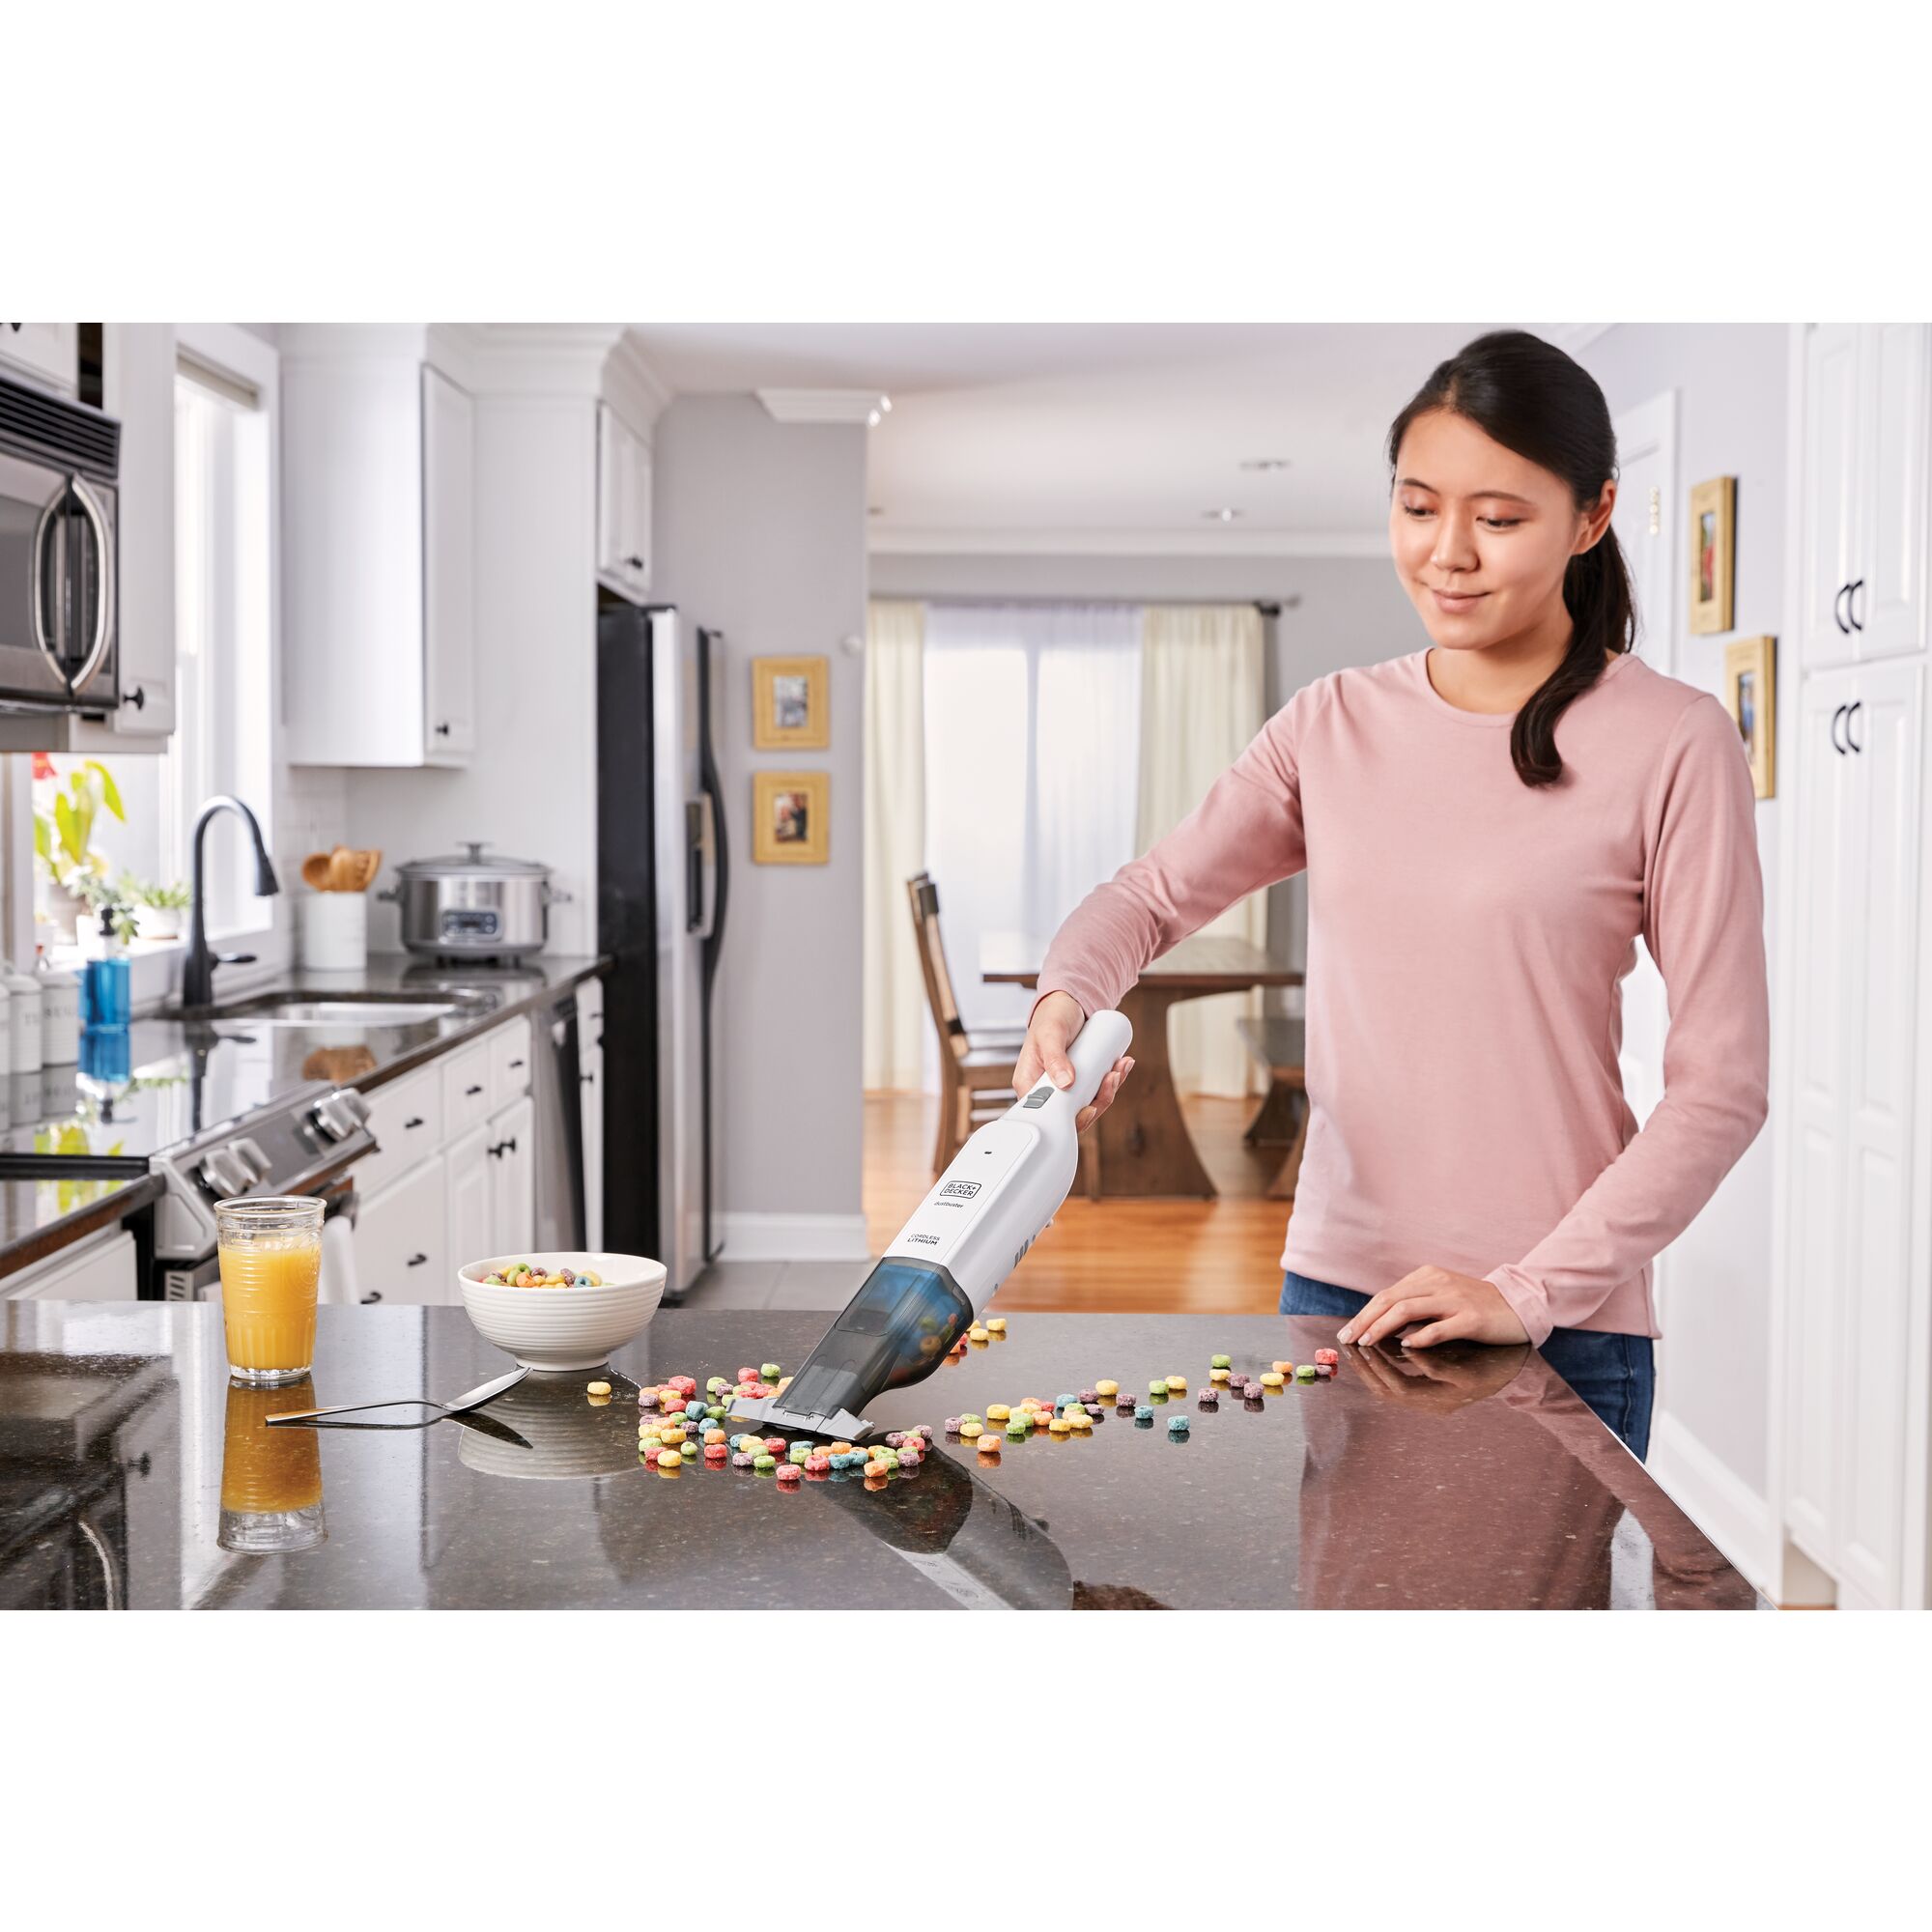 dustbuster 12 volt MAX AdvancedClean cordless hand vacuum being used by a person to clean food spillage on kitchen counter.